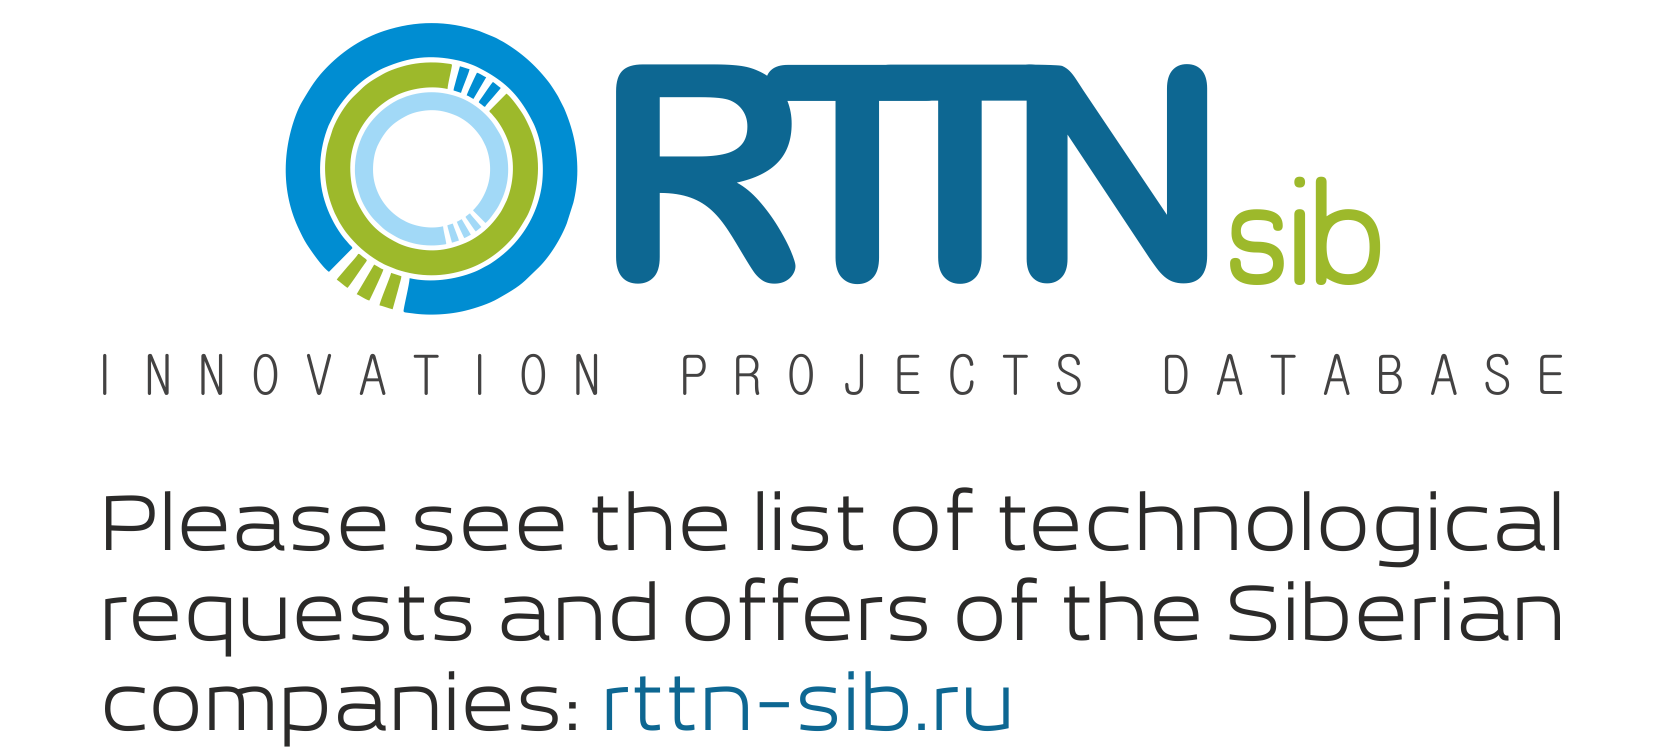 Please see the list of technological requests and offers of the Siberian companies: http://rttn-sib.ru